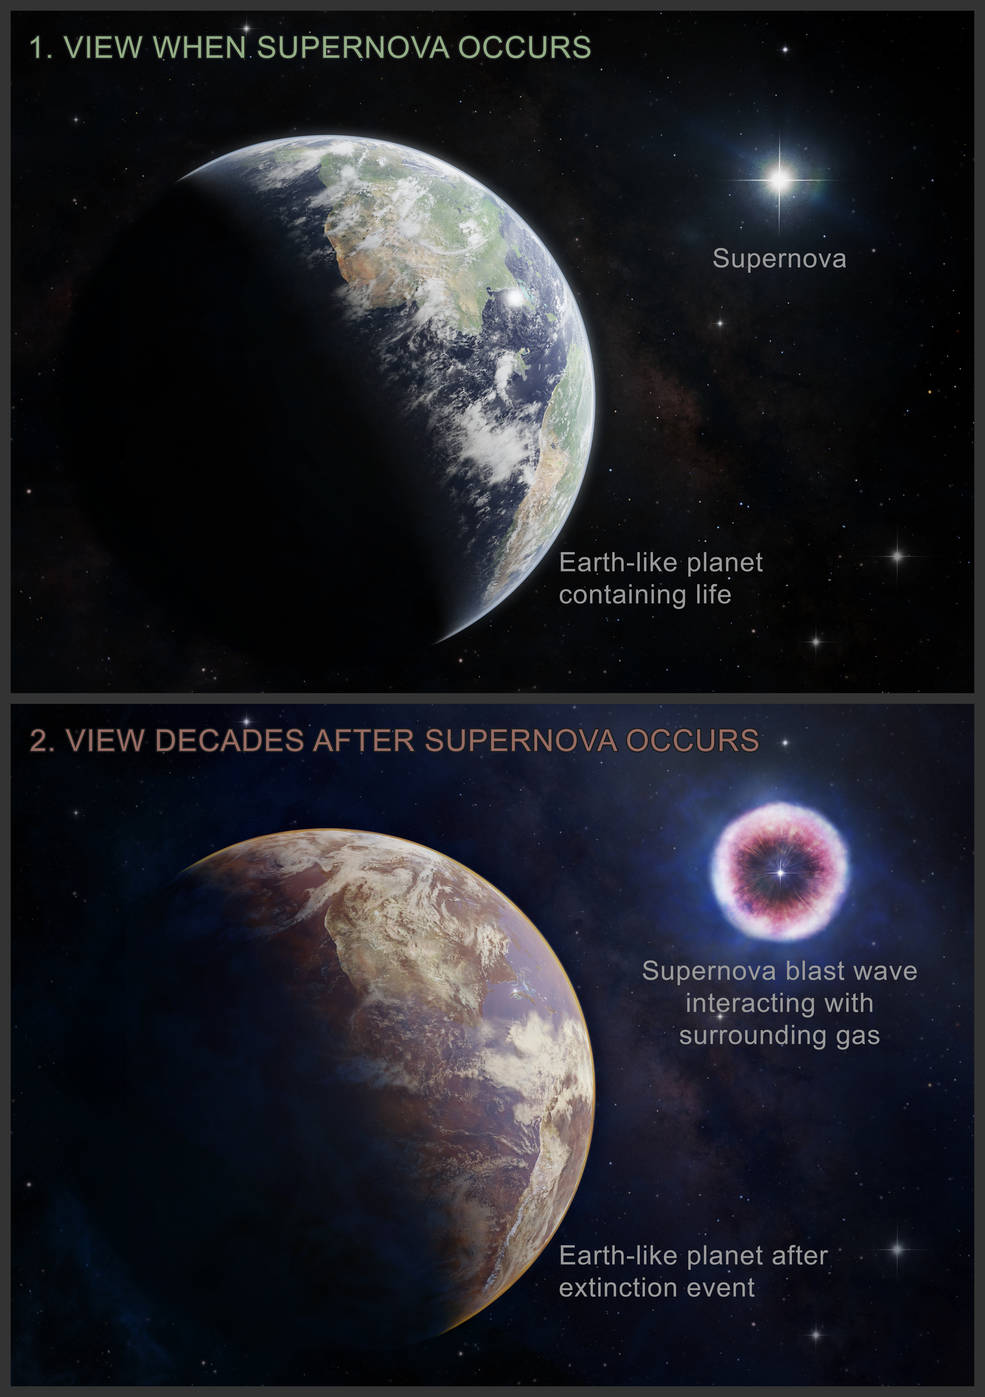 Panel #1 shows an artist's impression of the Earth-like planet teeming with life before the nearby supernova, while panel #2 illustrates the X-ray impacts that occurred years later. Image Credit: NASA/CXC/M. Weiss